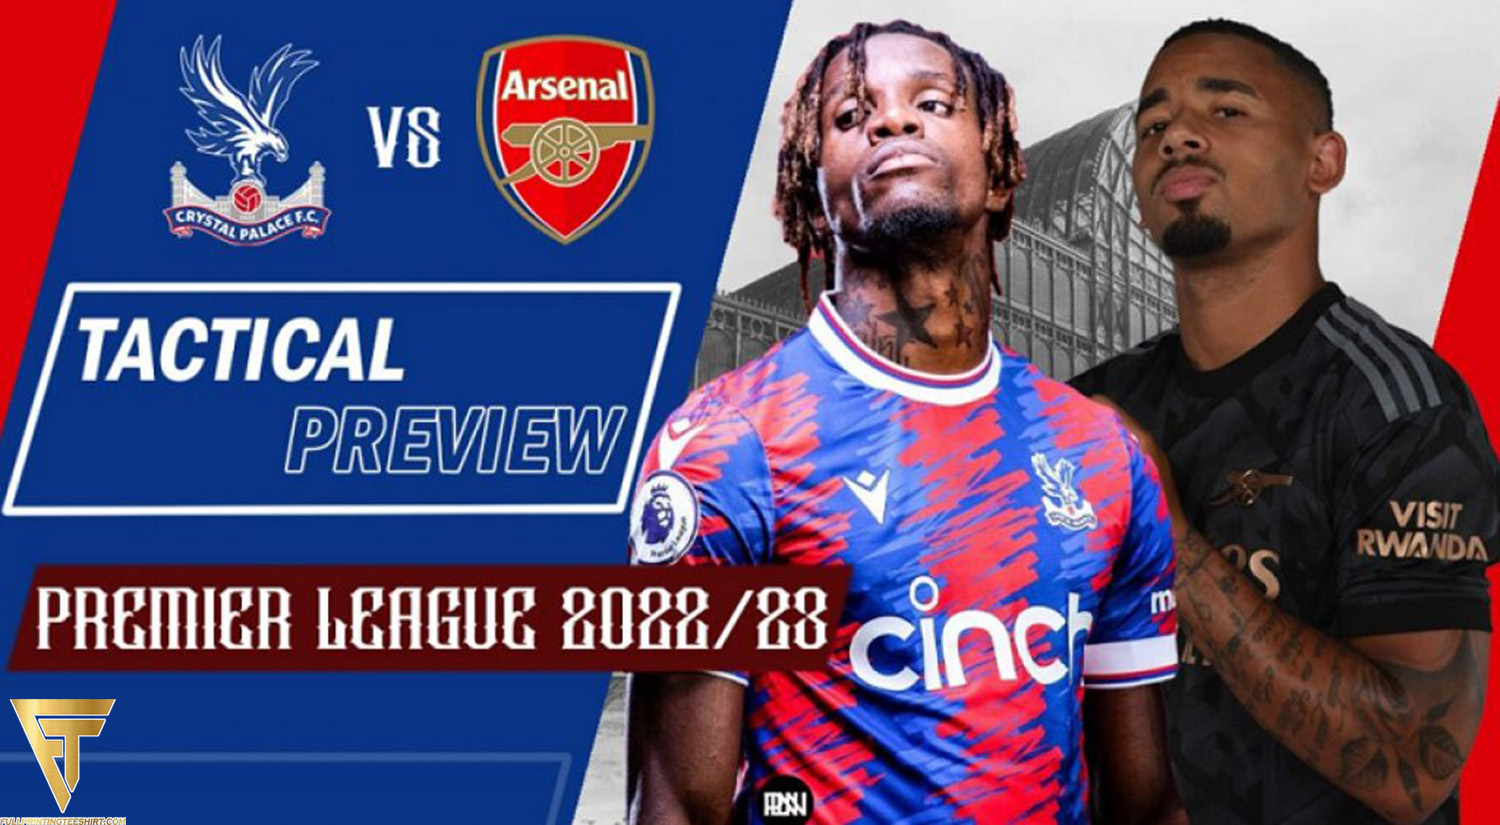 Clash of the Titans Arsenal vs Crystal Palace - A Premier League Spectacle at the Emirates